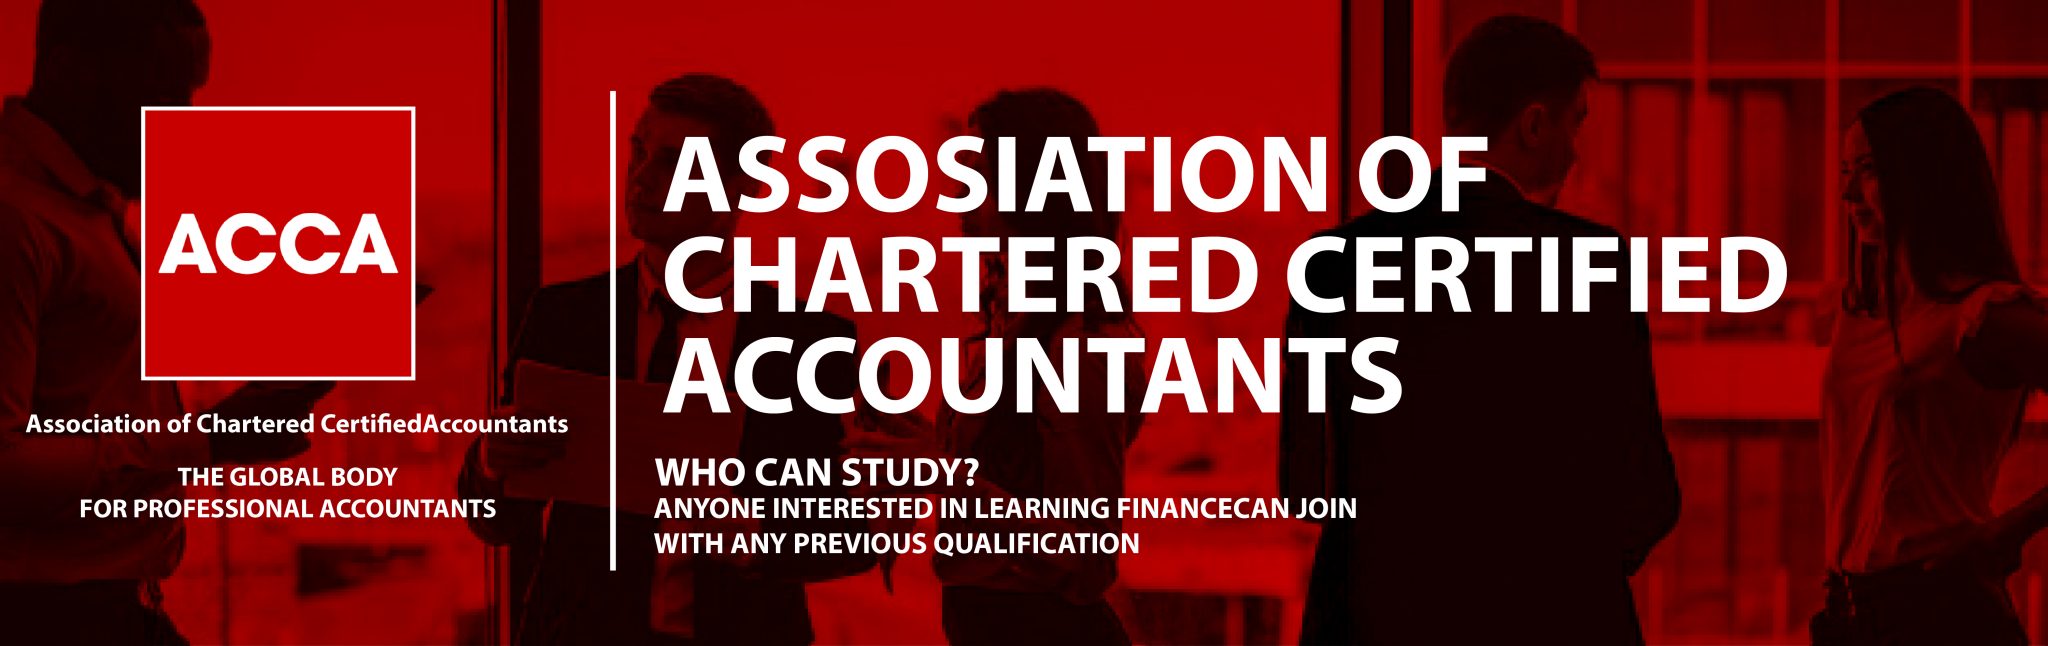 Association Of Chartered Certified Accountants (ACCA)